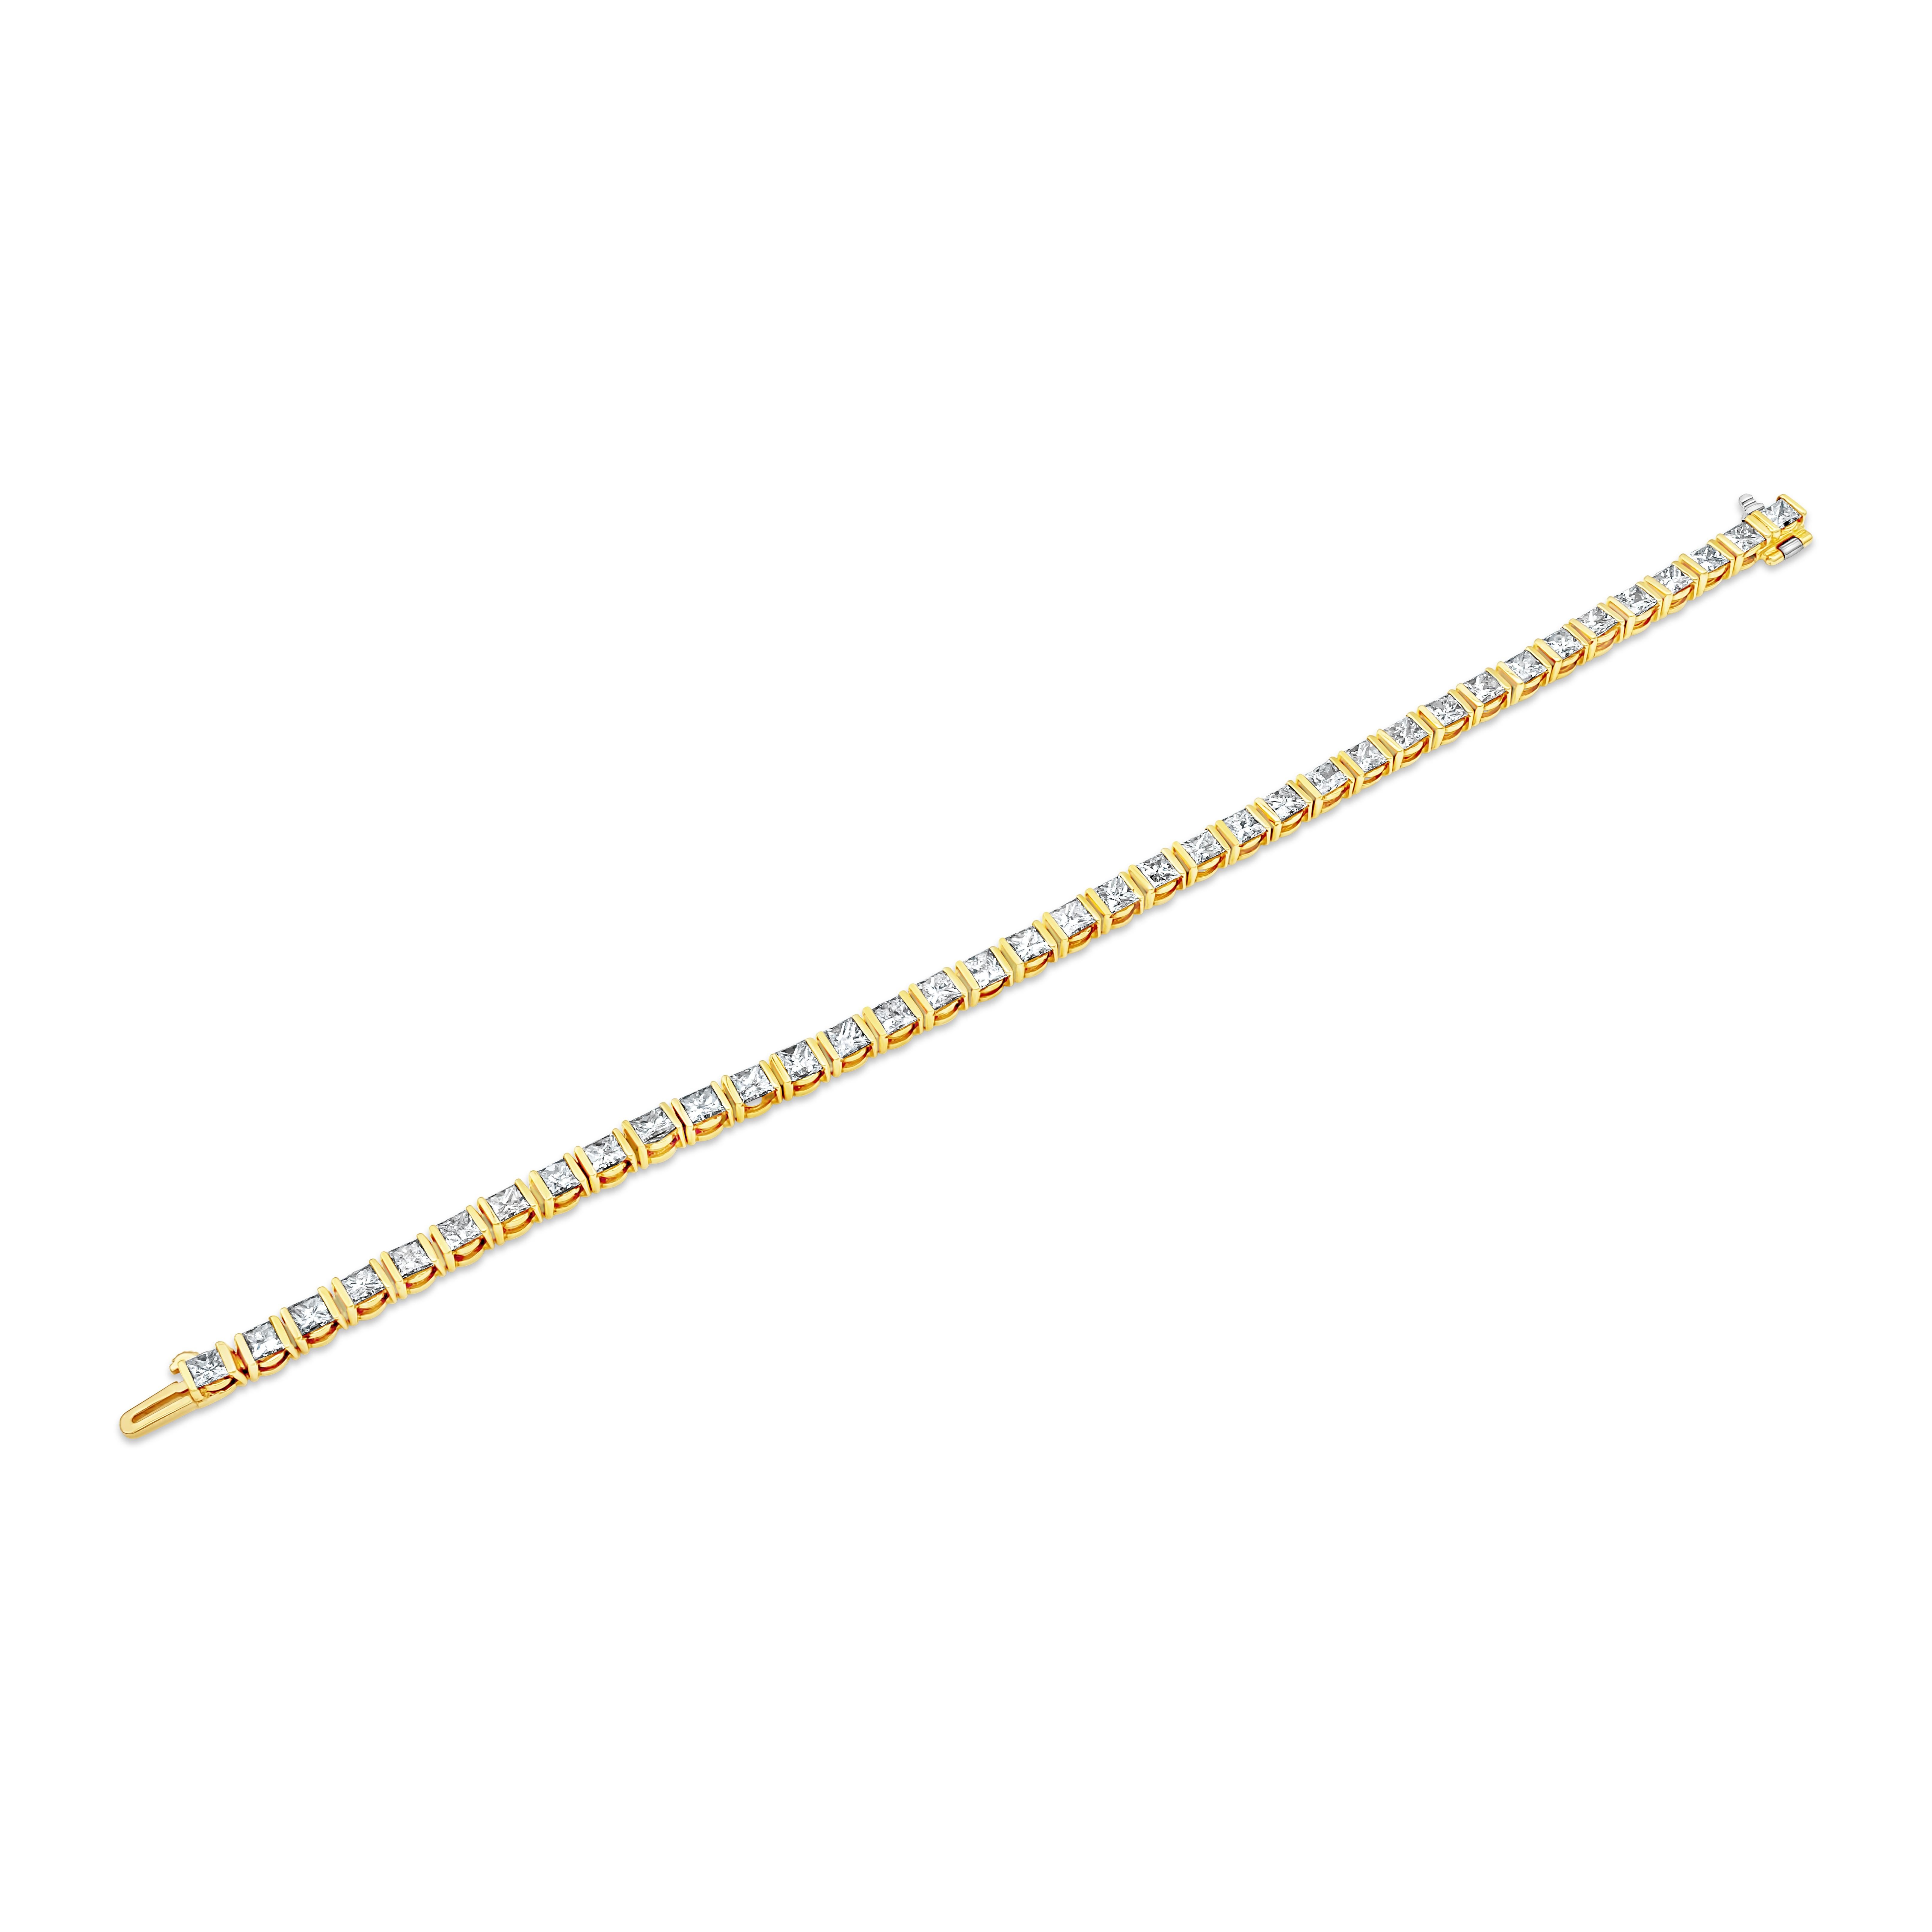 This gorgeous diamond tennis bracelet showcases 7.71 carats total princess cut diamonds. Mounted in half bezel setting. Made in 18K Yellow Gold. 

Roman Malakov is a custom house, specializing in creating anything you can imagine. If you would like